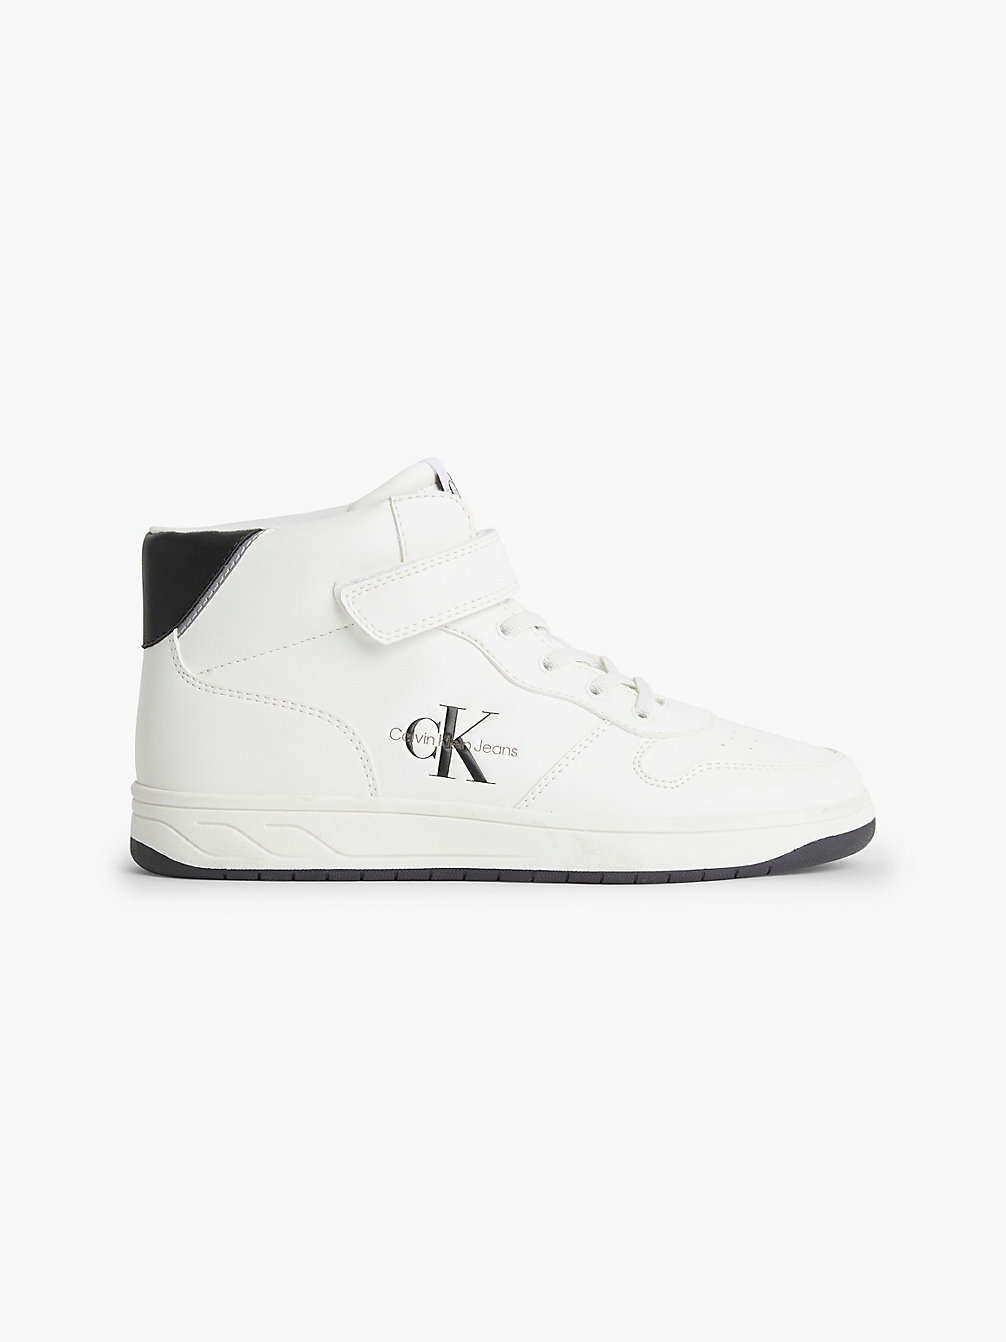 WHITE/BLACK Recycled Kids High-Top Trainers undefined kids unisex Calvin Klein